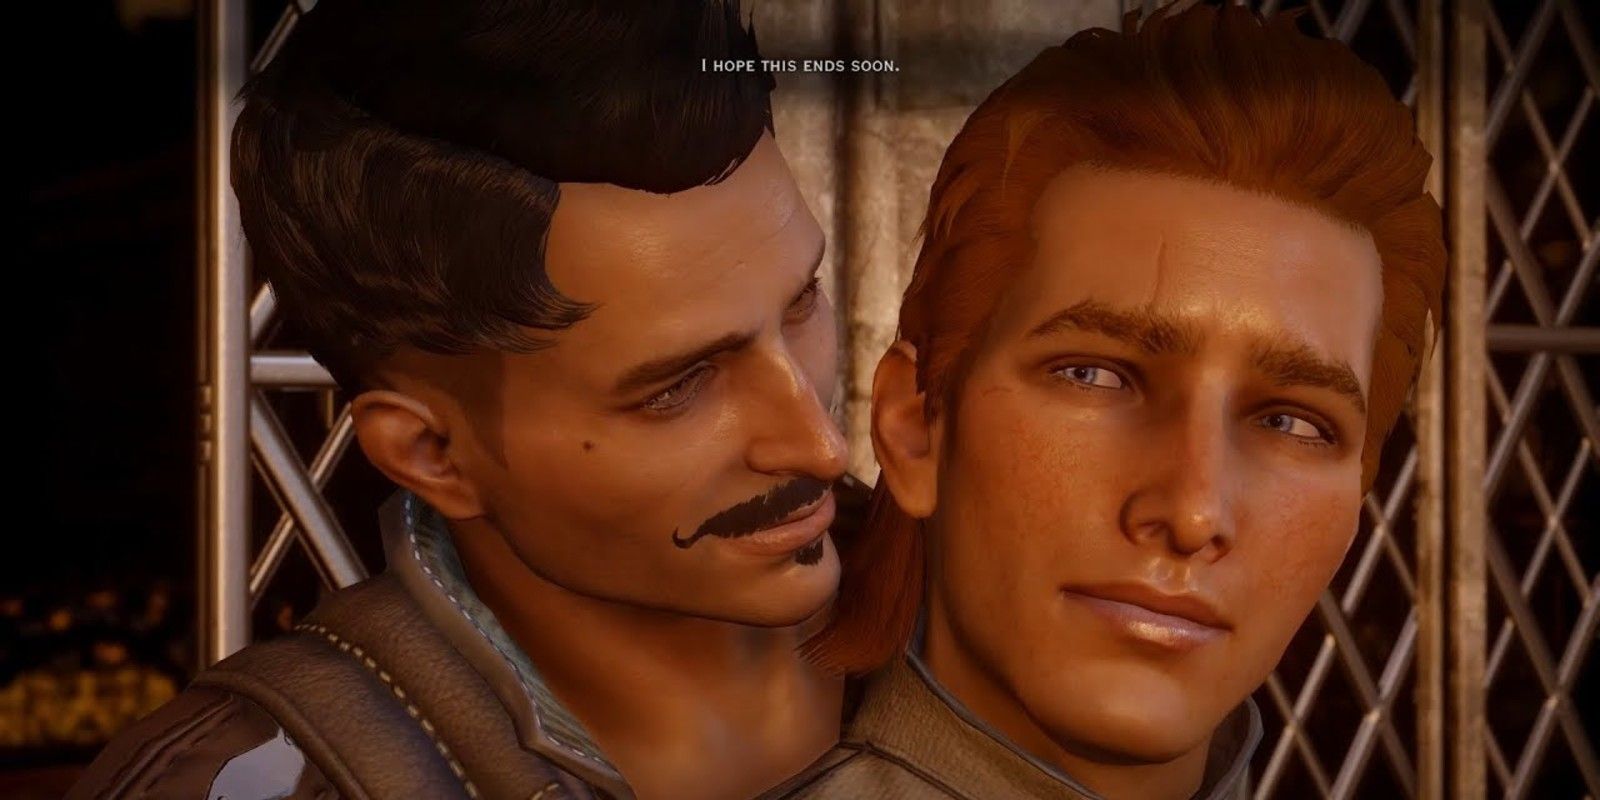 The Inquisitor romances and shares a moment with Dorian on the Skyhold balcony at the end of the game in Dragon Age: Inquisition